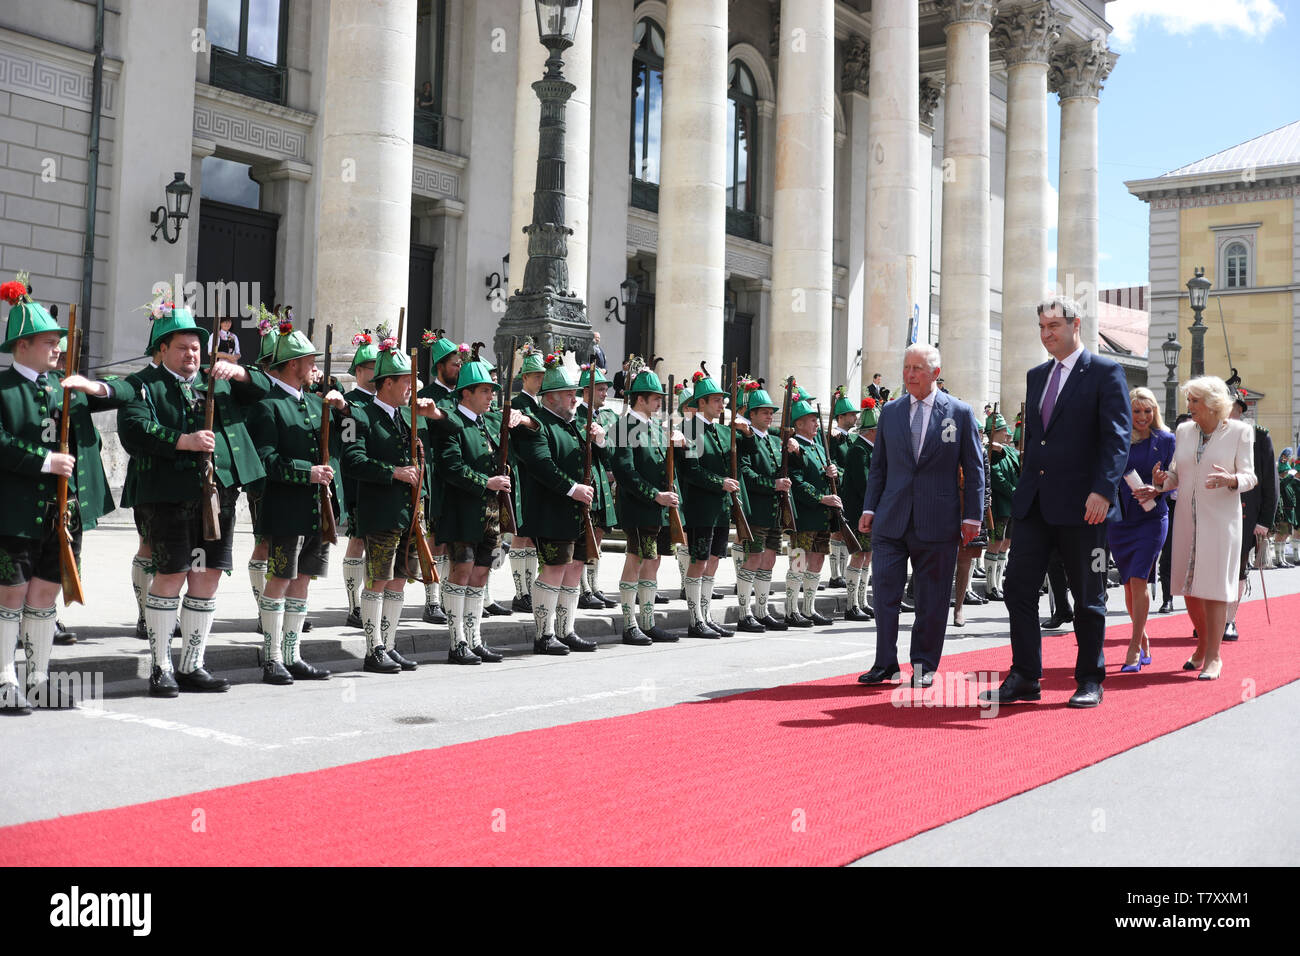 The Prince of Wales and the Duchess of Cornwall are officially welcomed to Munich, Germany, in an event hosted by the Minister-President of Bavaria Markus Soder. Stock Photo